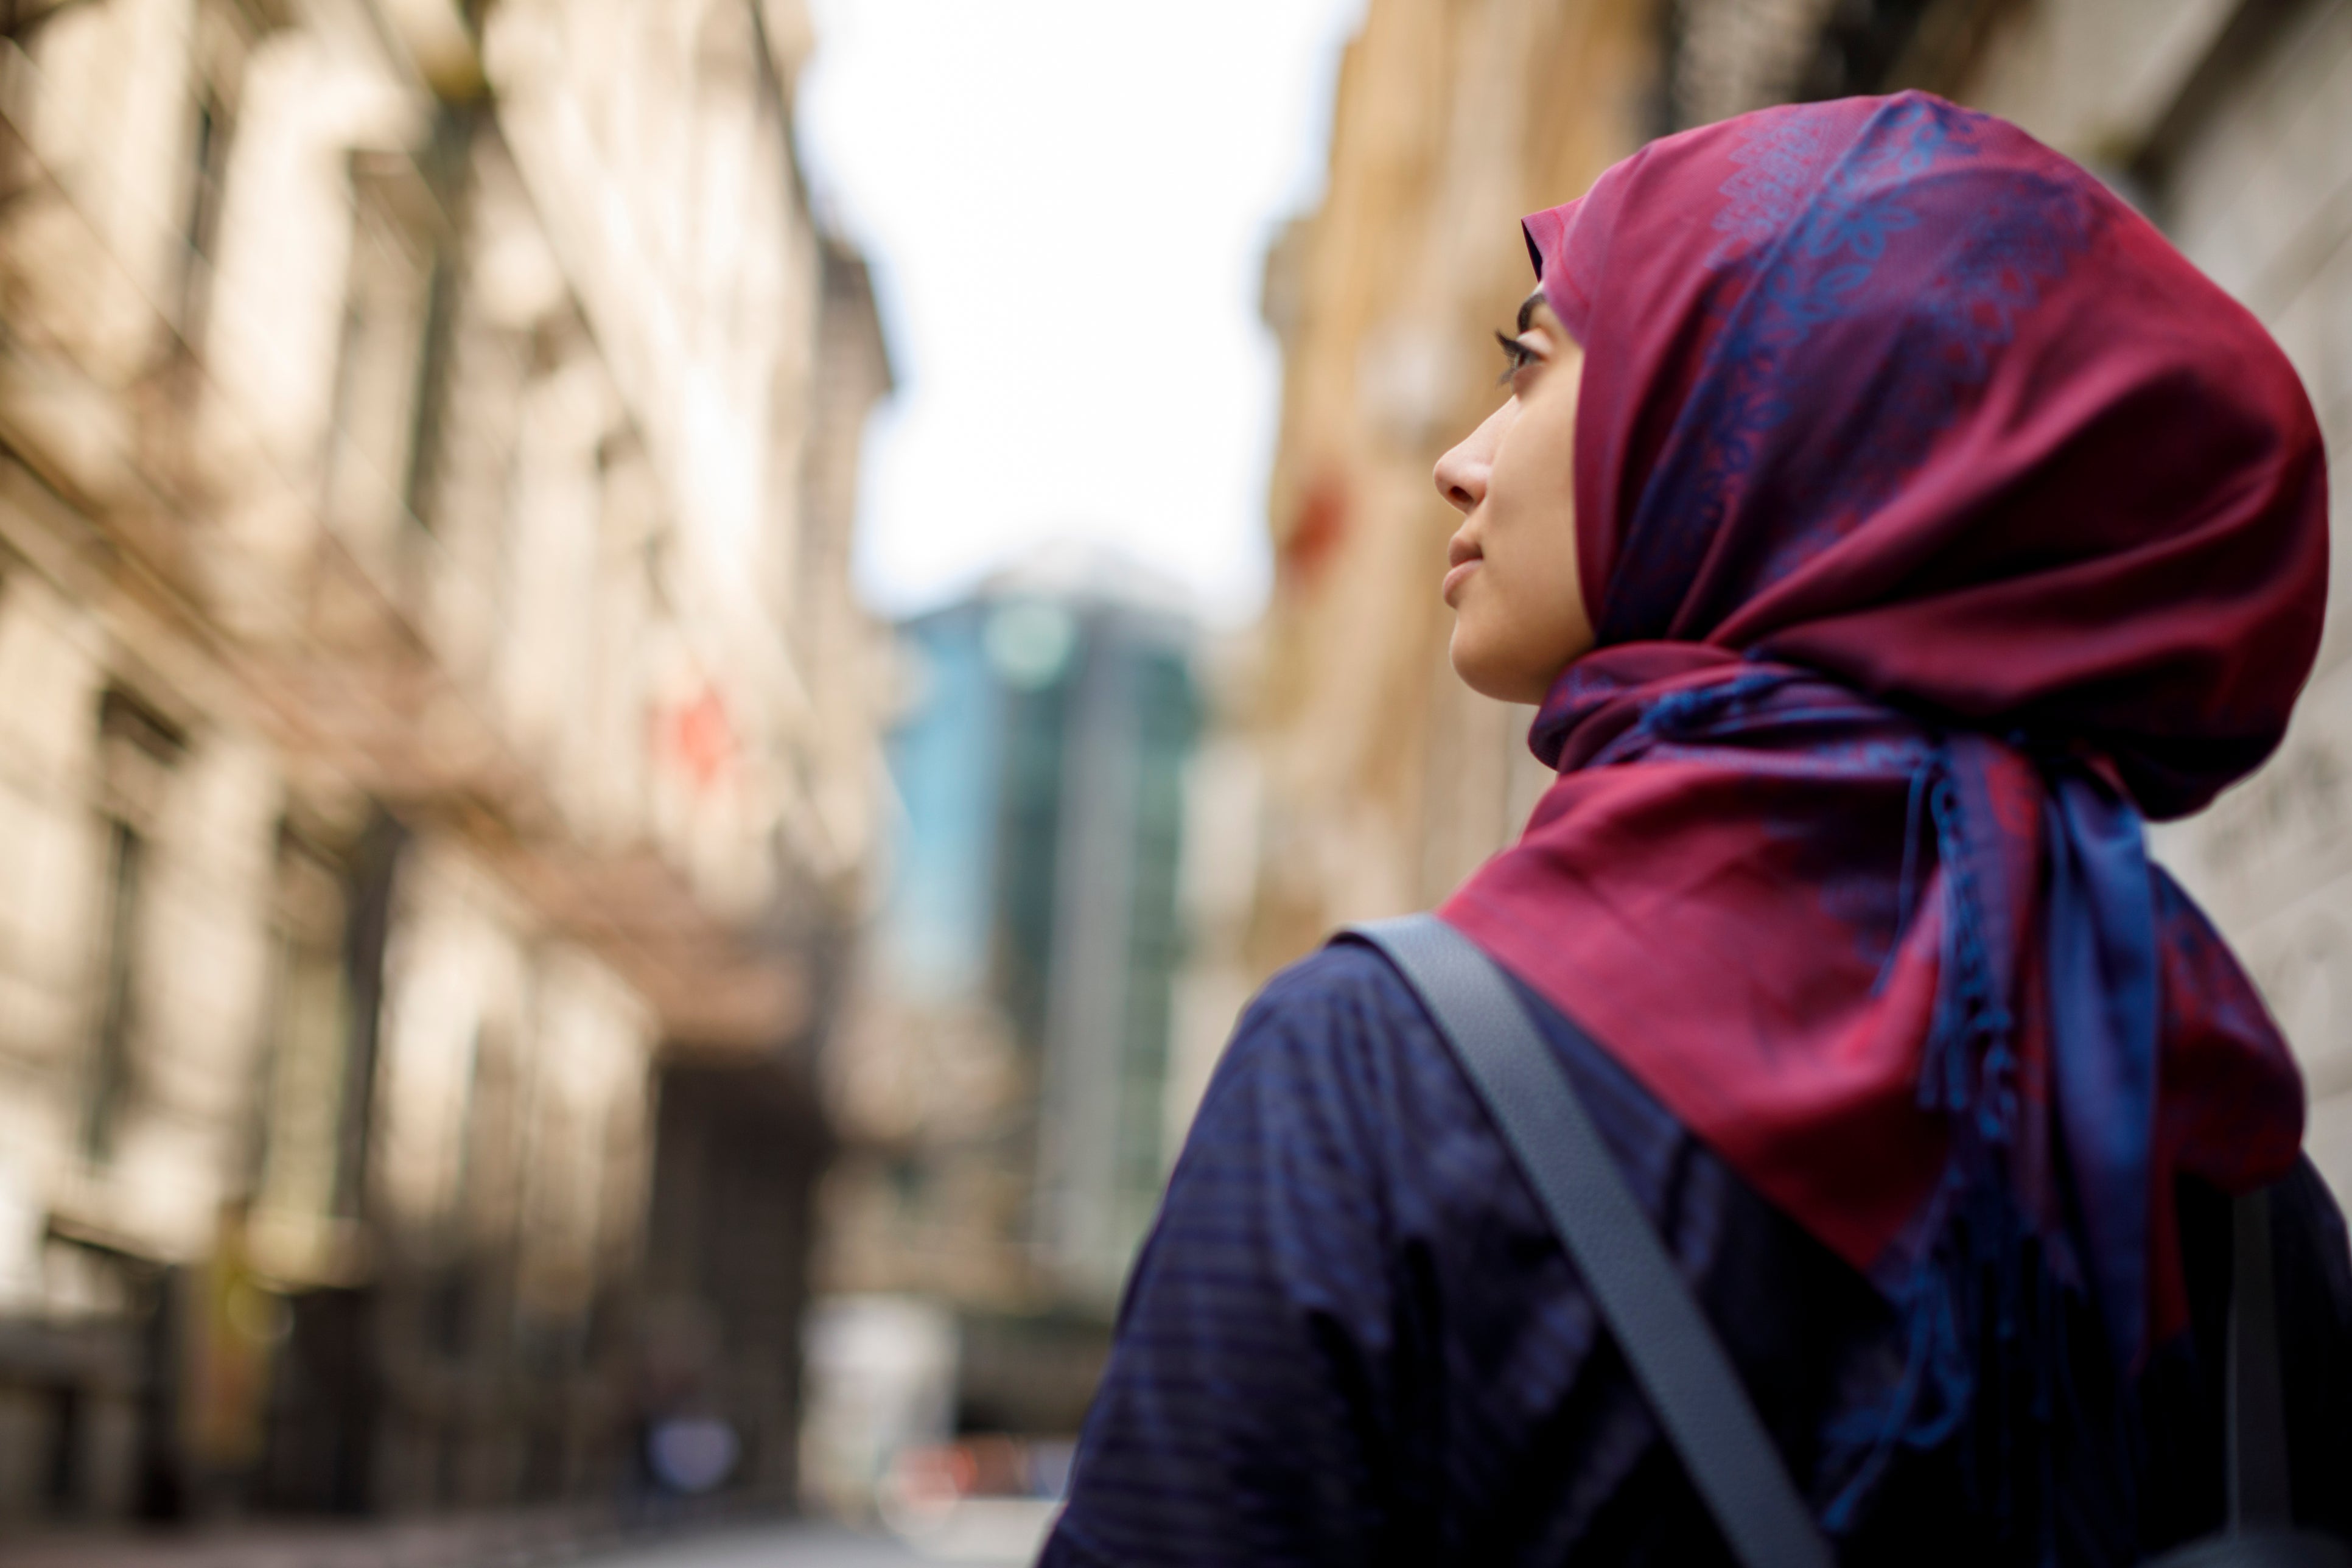 In 2010, France passed legislation prohibiting full face coverings in public